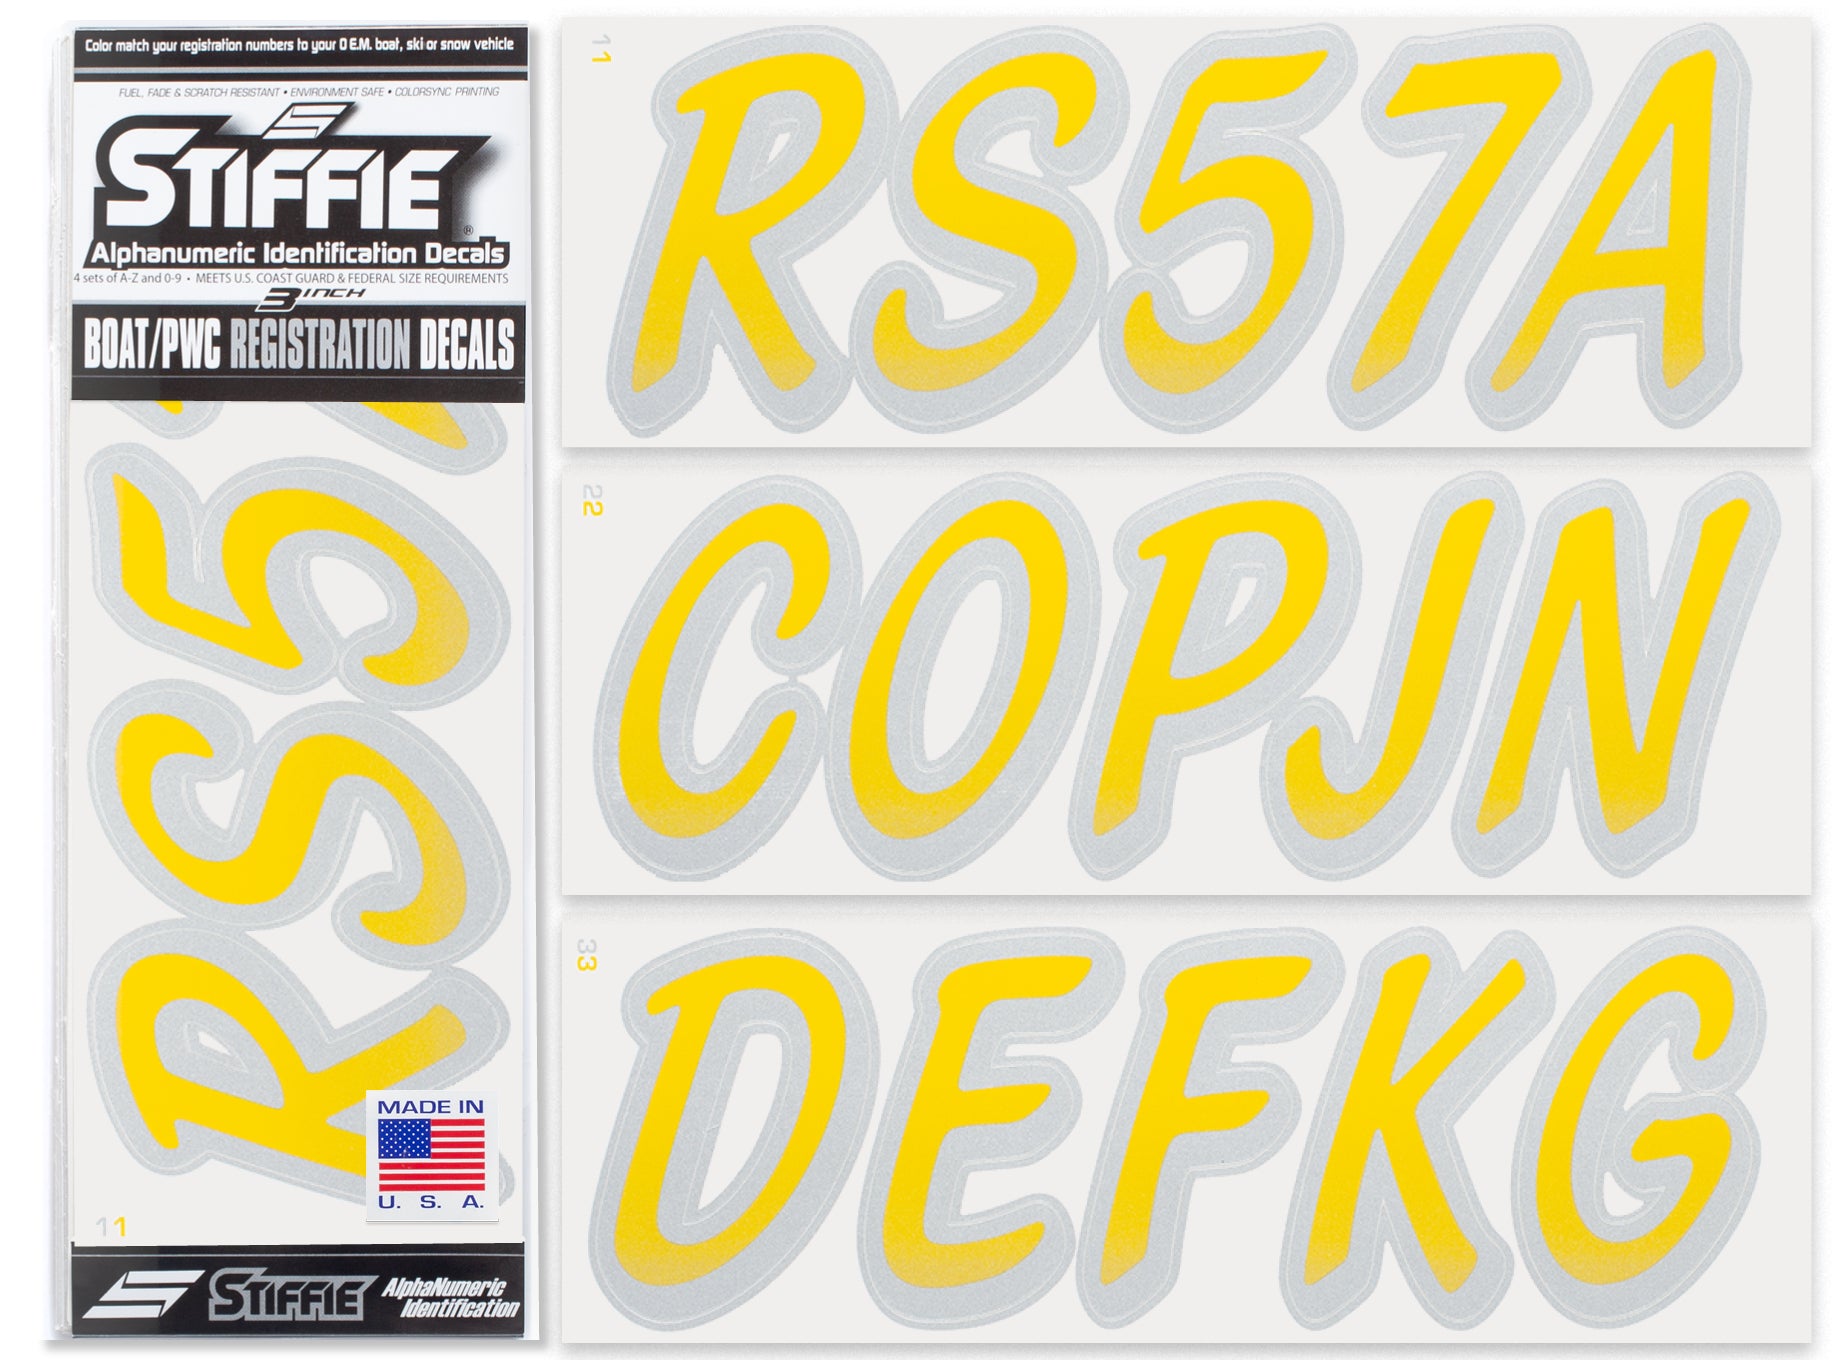 STIFFIE Whipline Yellow/Silver 3" Alpha-Numeric Registration Identification Numbers Stickers Decals for Boats & Personal Watercraft